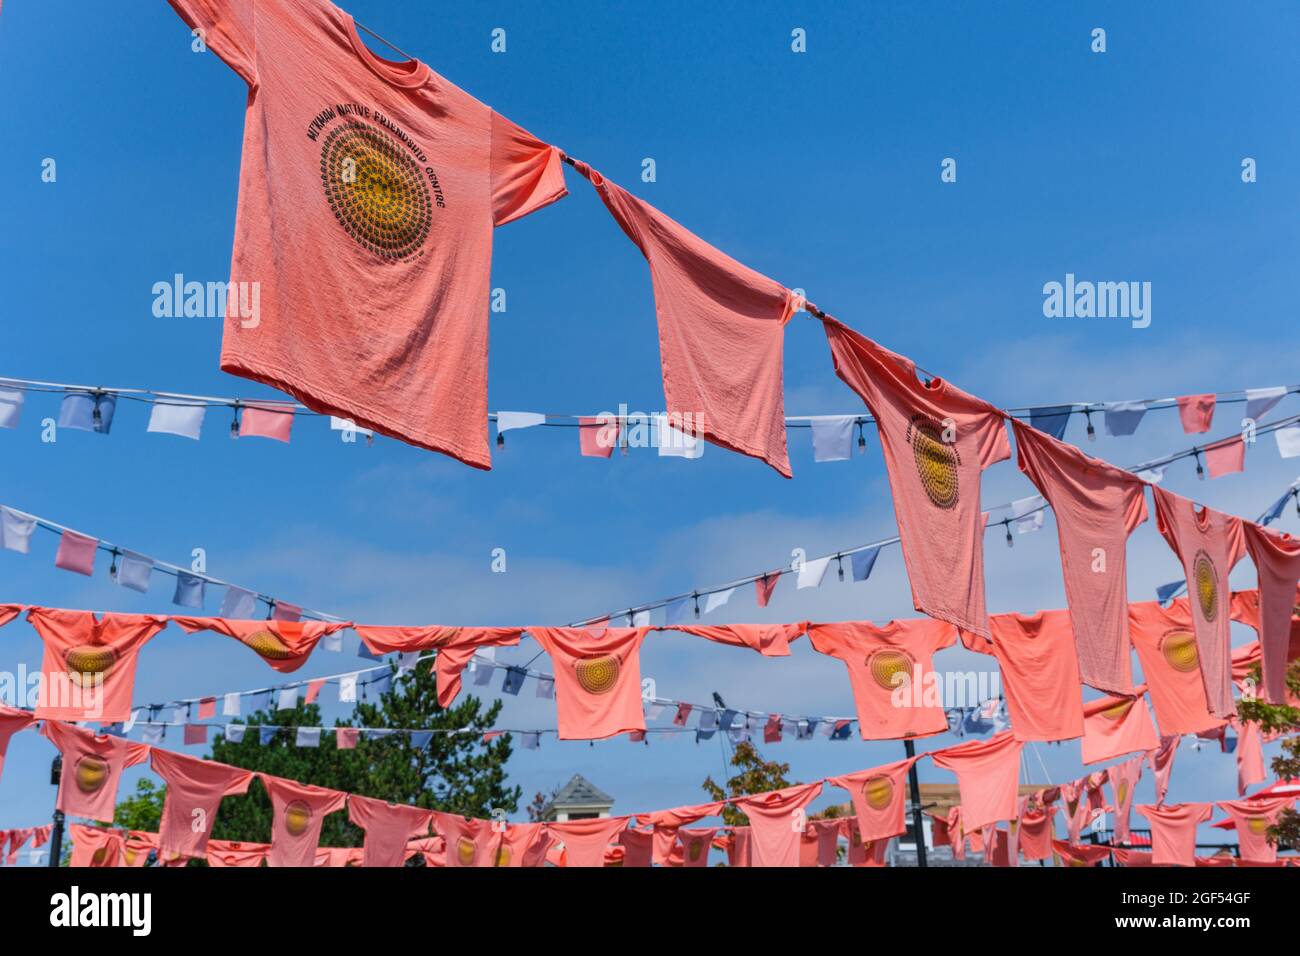 Halifax, Nova Scotia, Canada - 10 August 2021: Orange shirts hang at the Halifax waterfront to honour Indigenous children forcibly taken to residentia Stock Photo